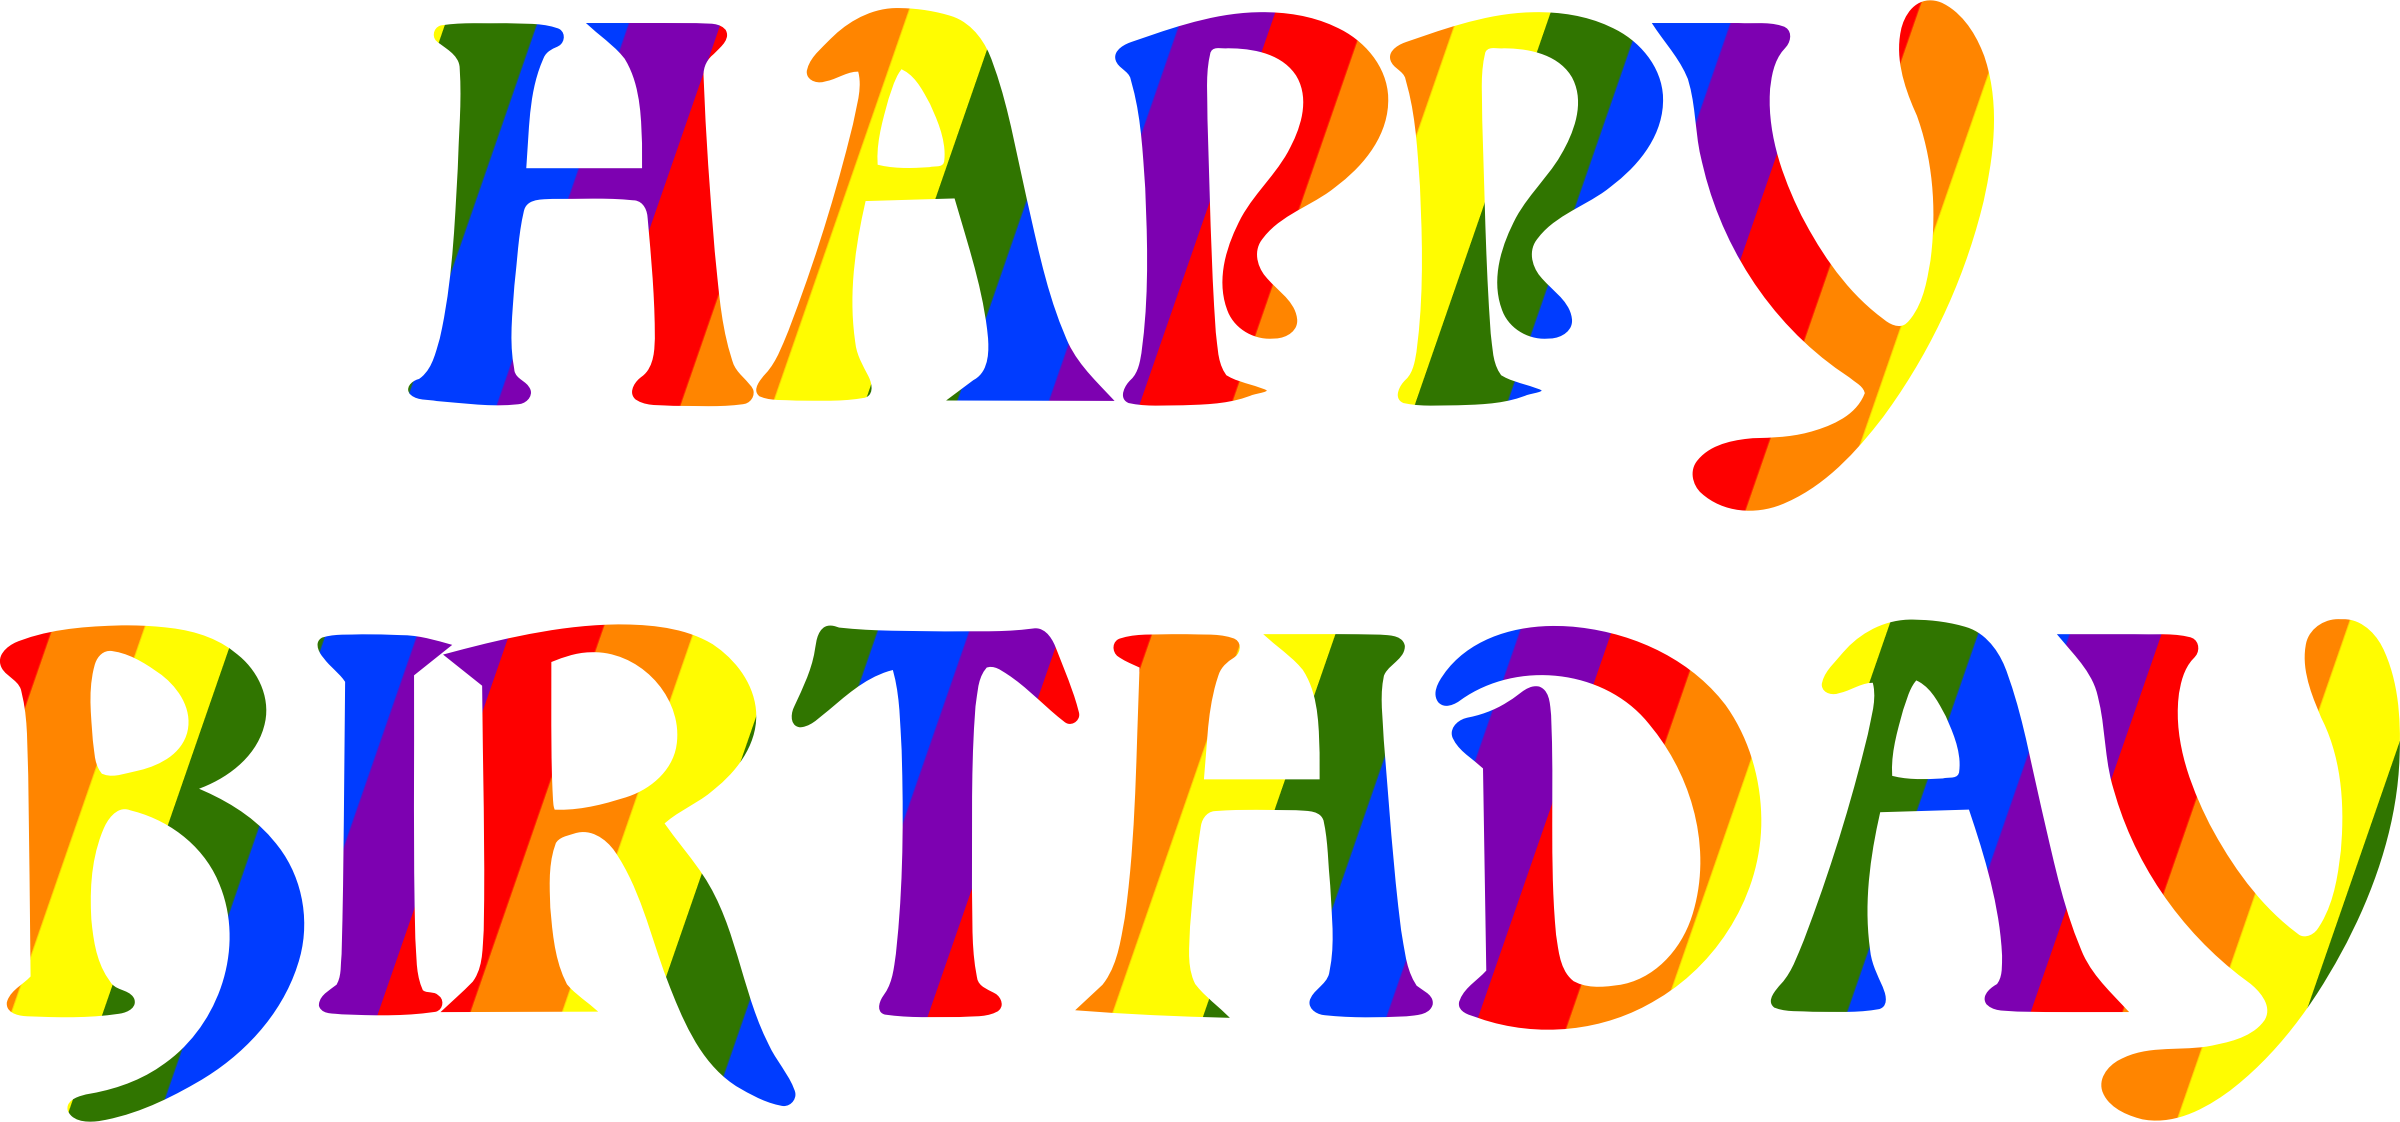 This Free Icons Png Design Of Happy Birthday Rainbow - Happy Birthday Designs .png (2400x1122)